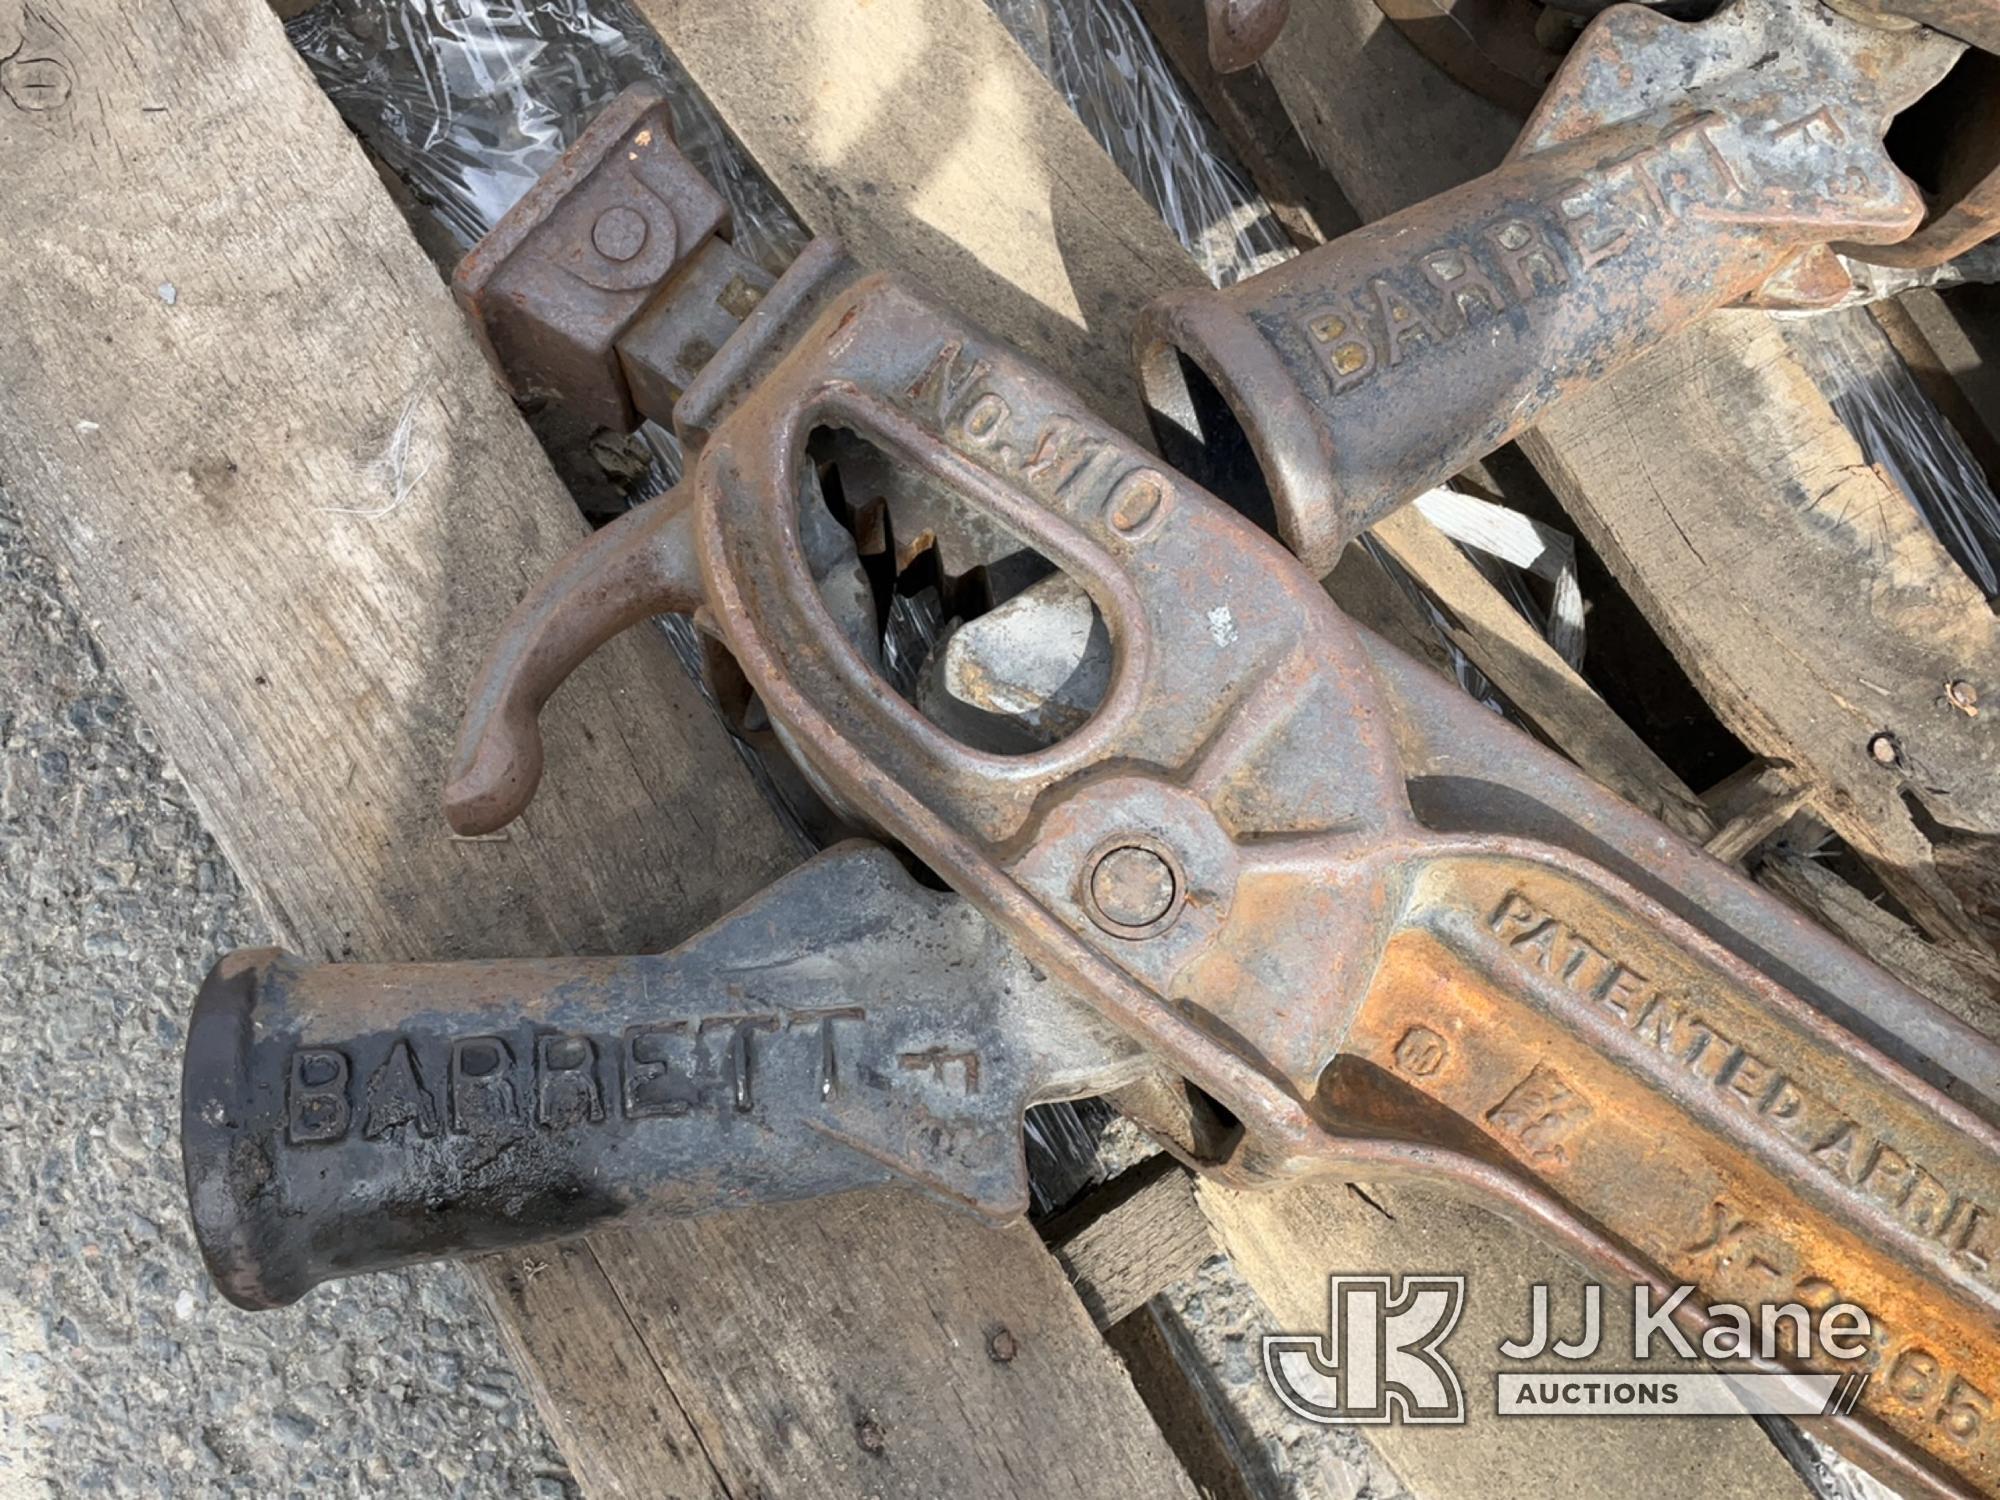 (Dixon, CA) Pallet of 3 Railroad Jacks (Worn) NOTE: This unit is being sold AS IS/WHERE IS via Timed